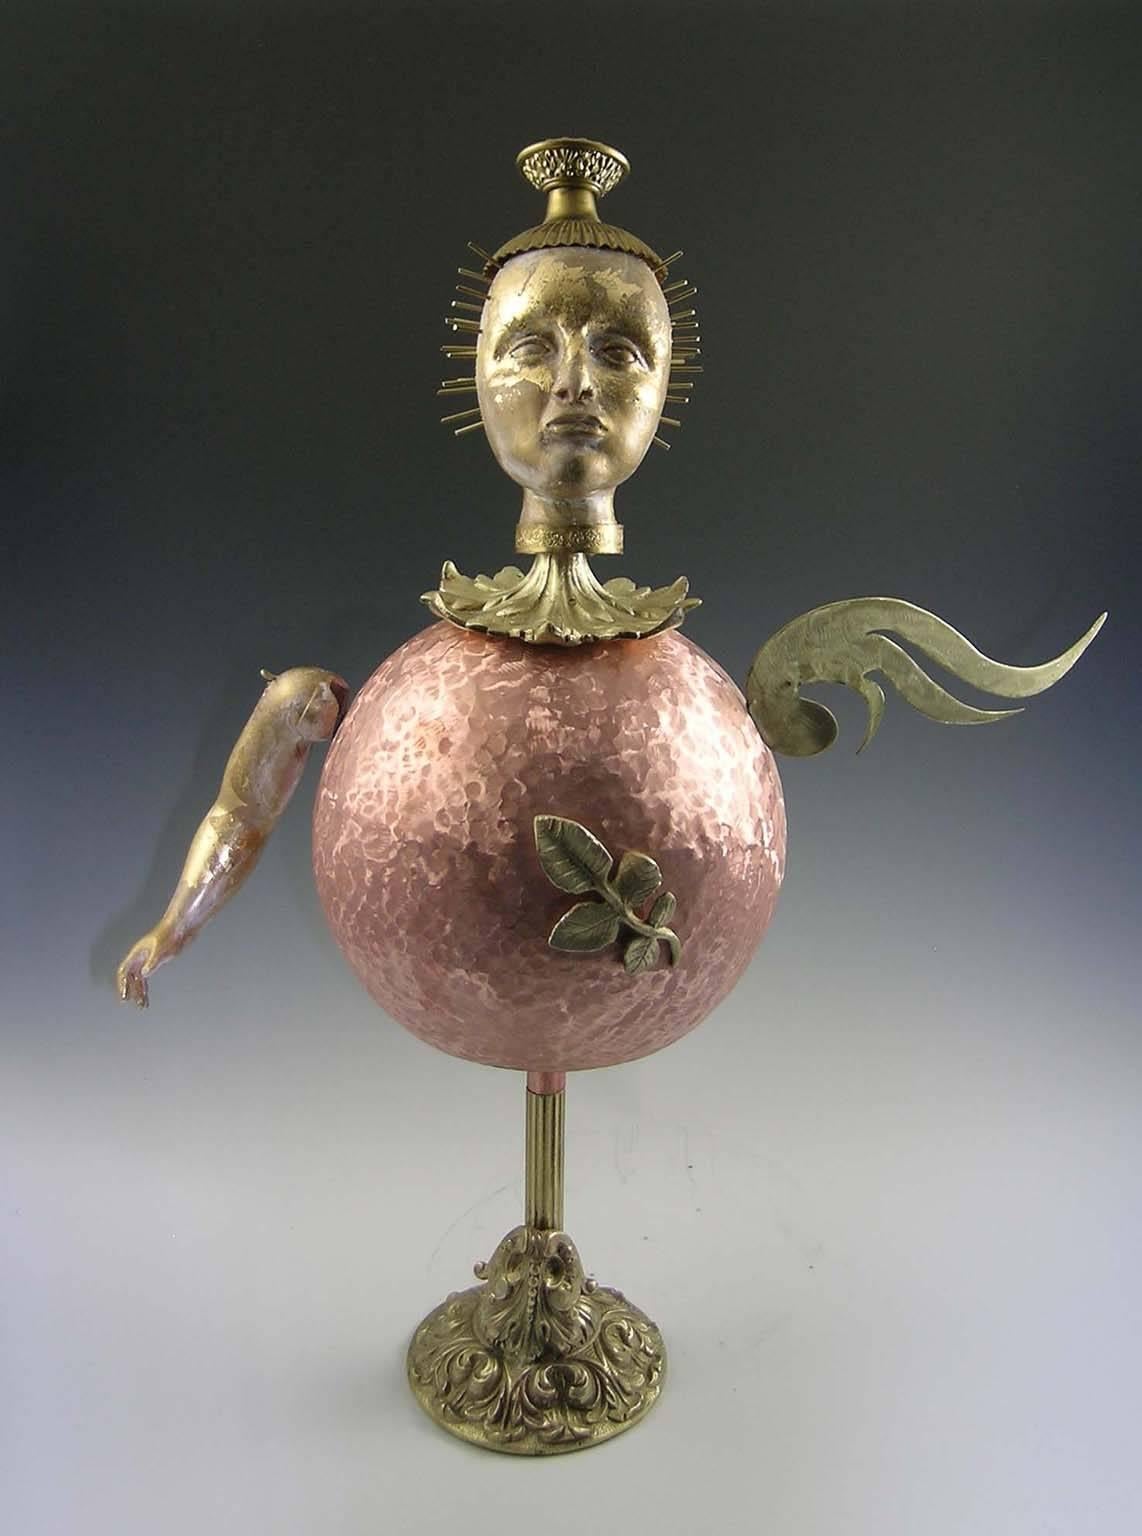 "Joker, " metal and clay doll-like figure with gold head, copper body - Mixed Media Art by Lannie Hart